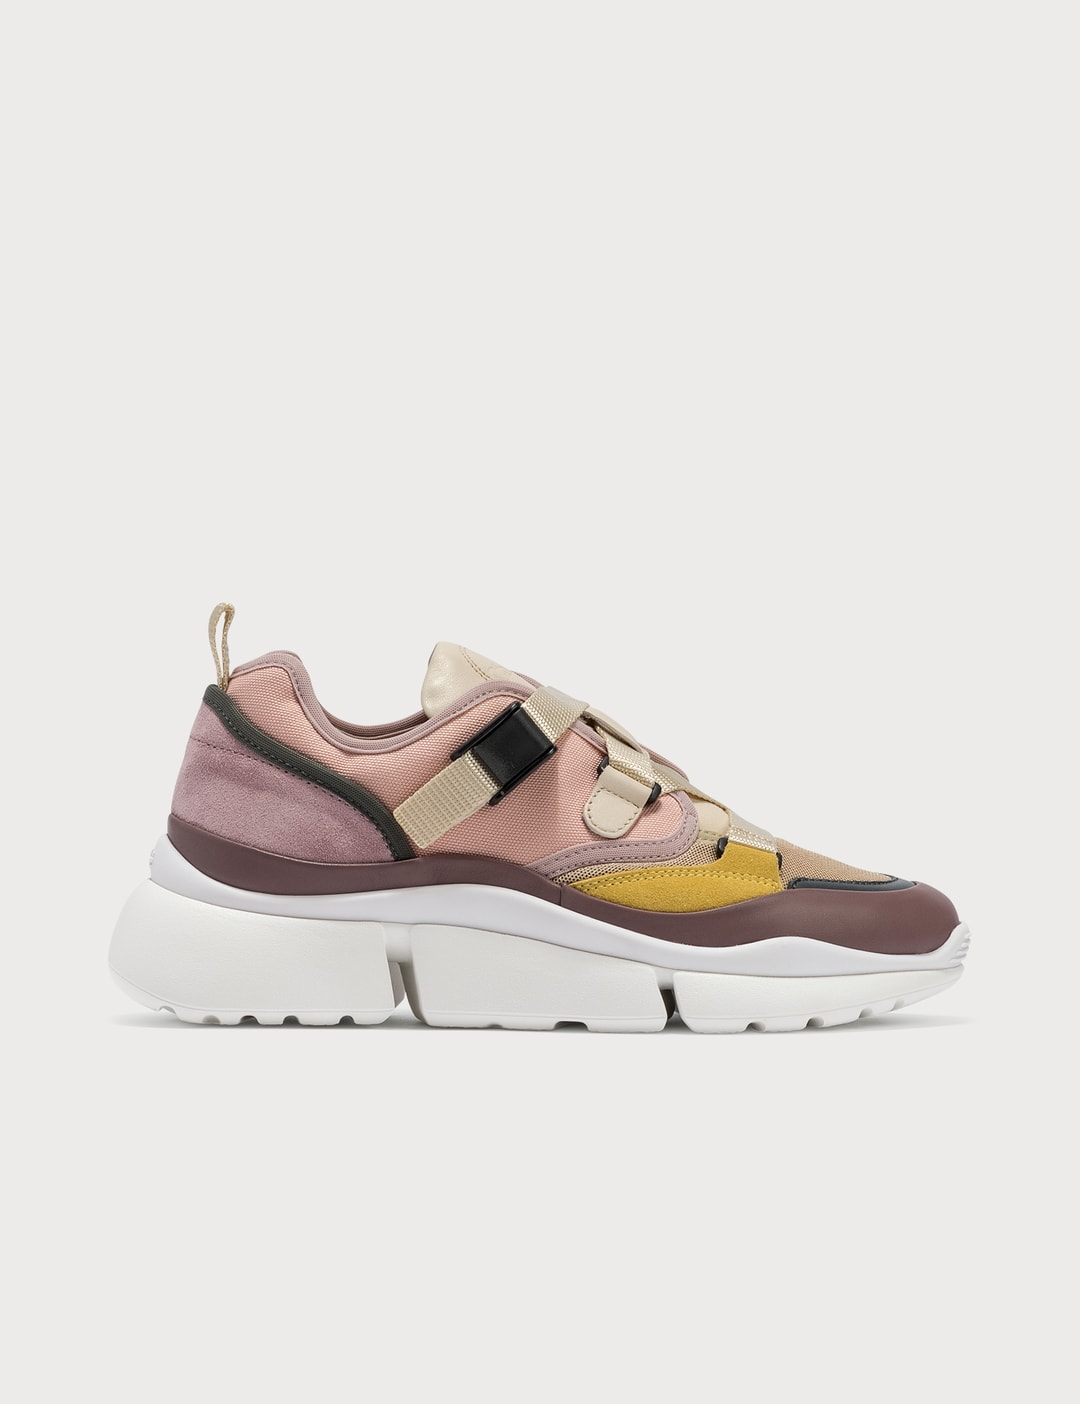 Chloé - Sonnie Low Top Sneaker | HBX - Globally Curated Fashion and ...